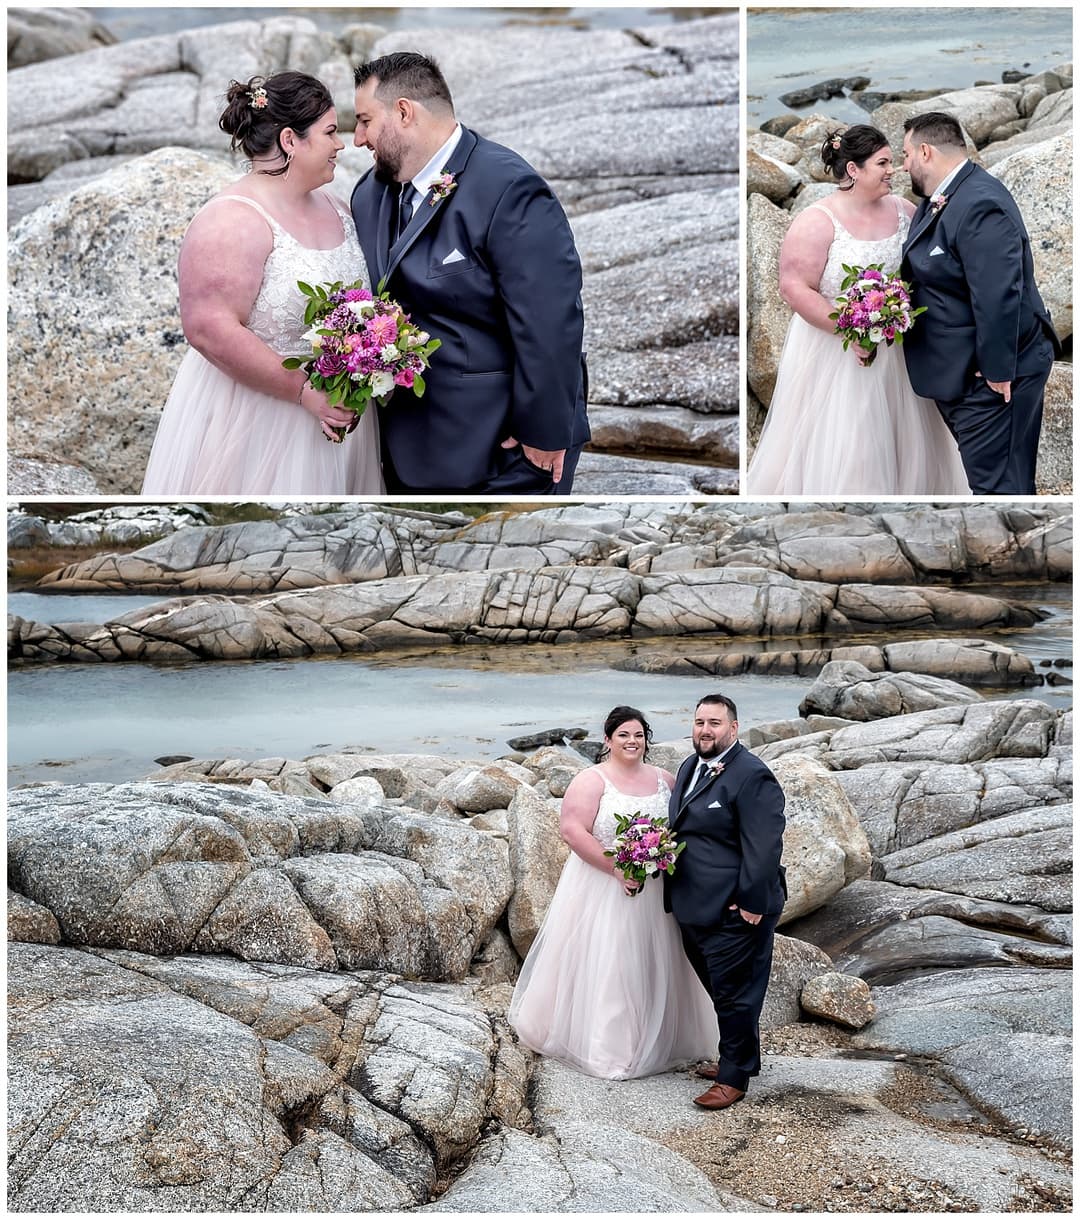 The bride and groom pose for wedding photos by the ocean at Peggy's Cove in Nova Scotia.